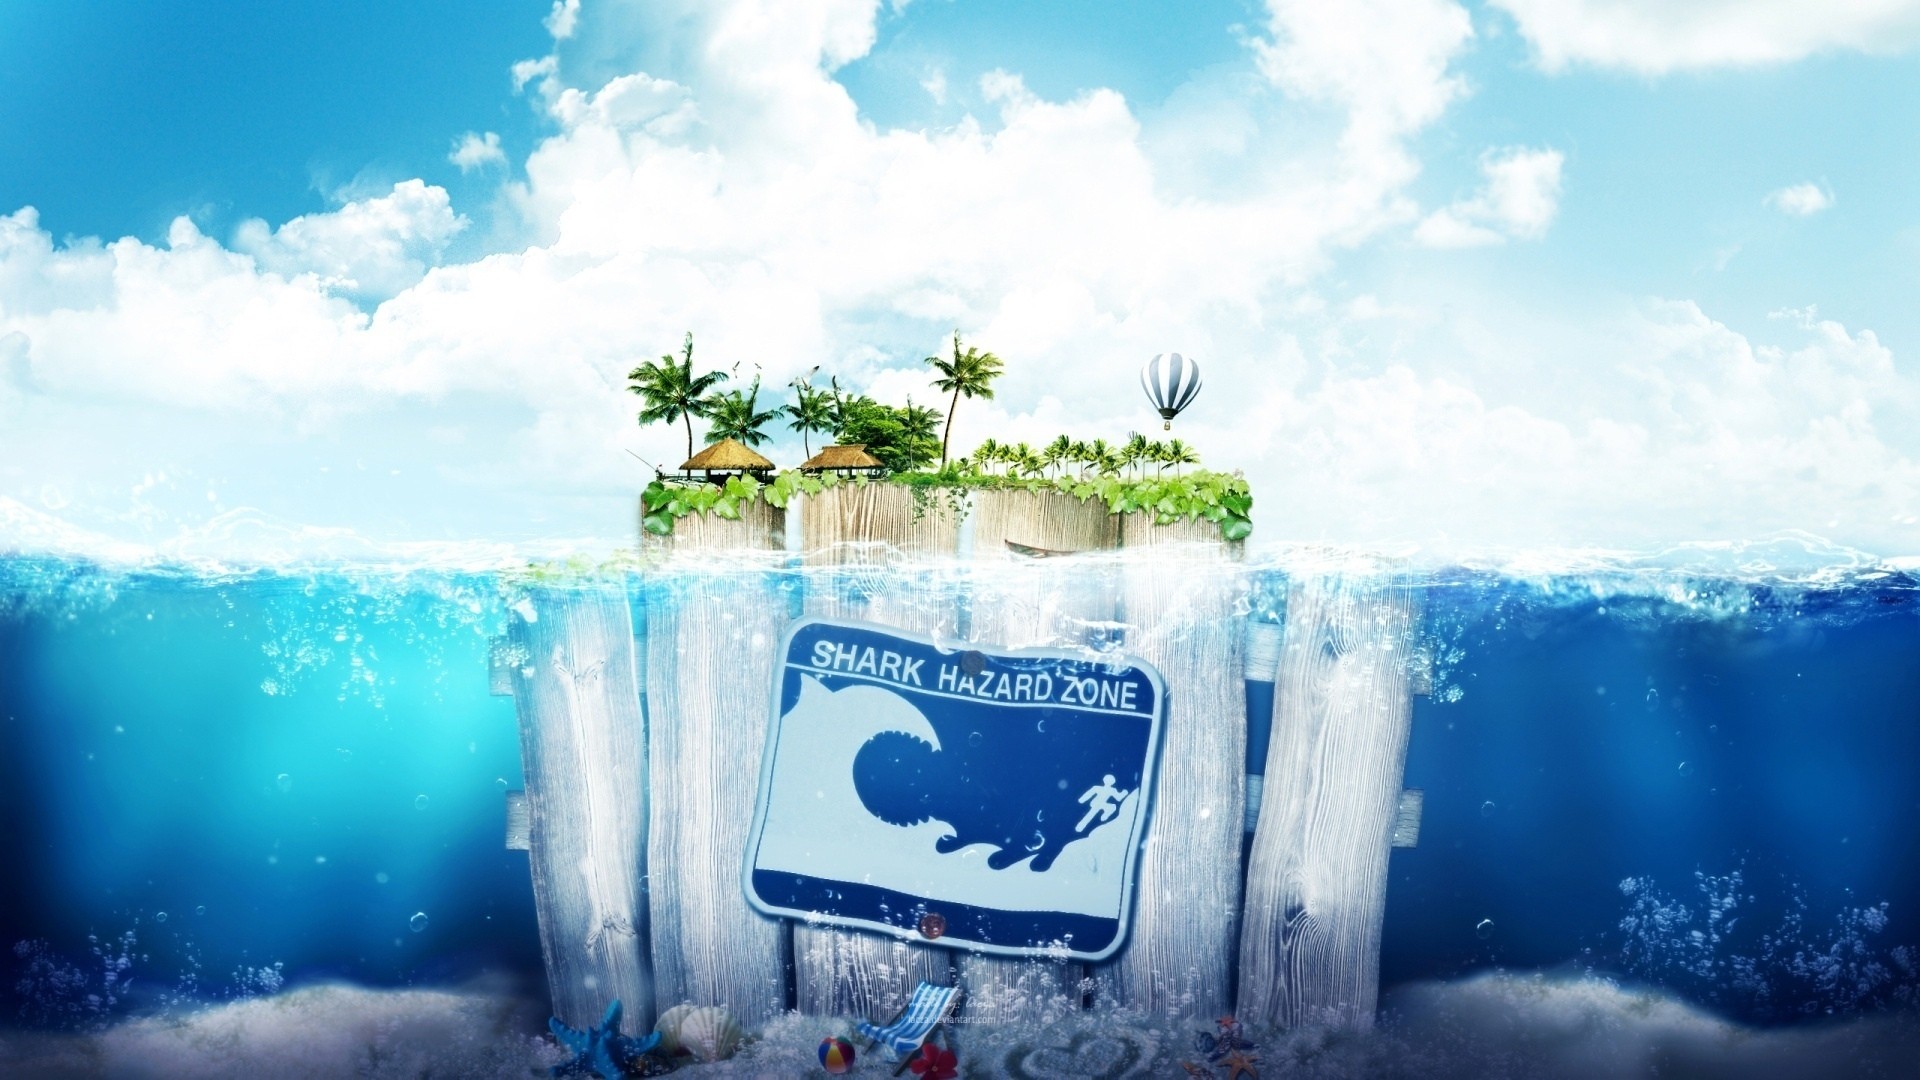 digital Art, Fantasy Art, Water, Sea, Underwater, Fence, Wood, Bubbles, Deck Chairs, Palm Trees, Island, Nature, Warning Signs, Shark, Humor, Waves, Clouds, Hot Air Balloons, House, Leaves, Starfish, Ball, Seashell, Sand Wallpaper